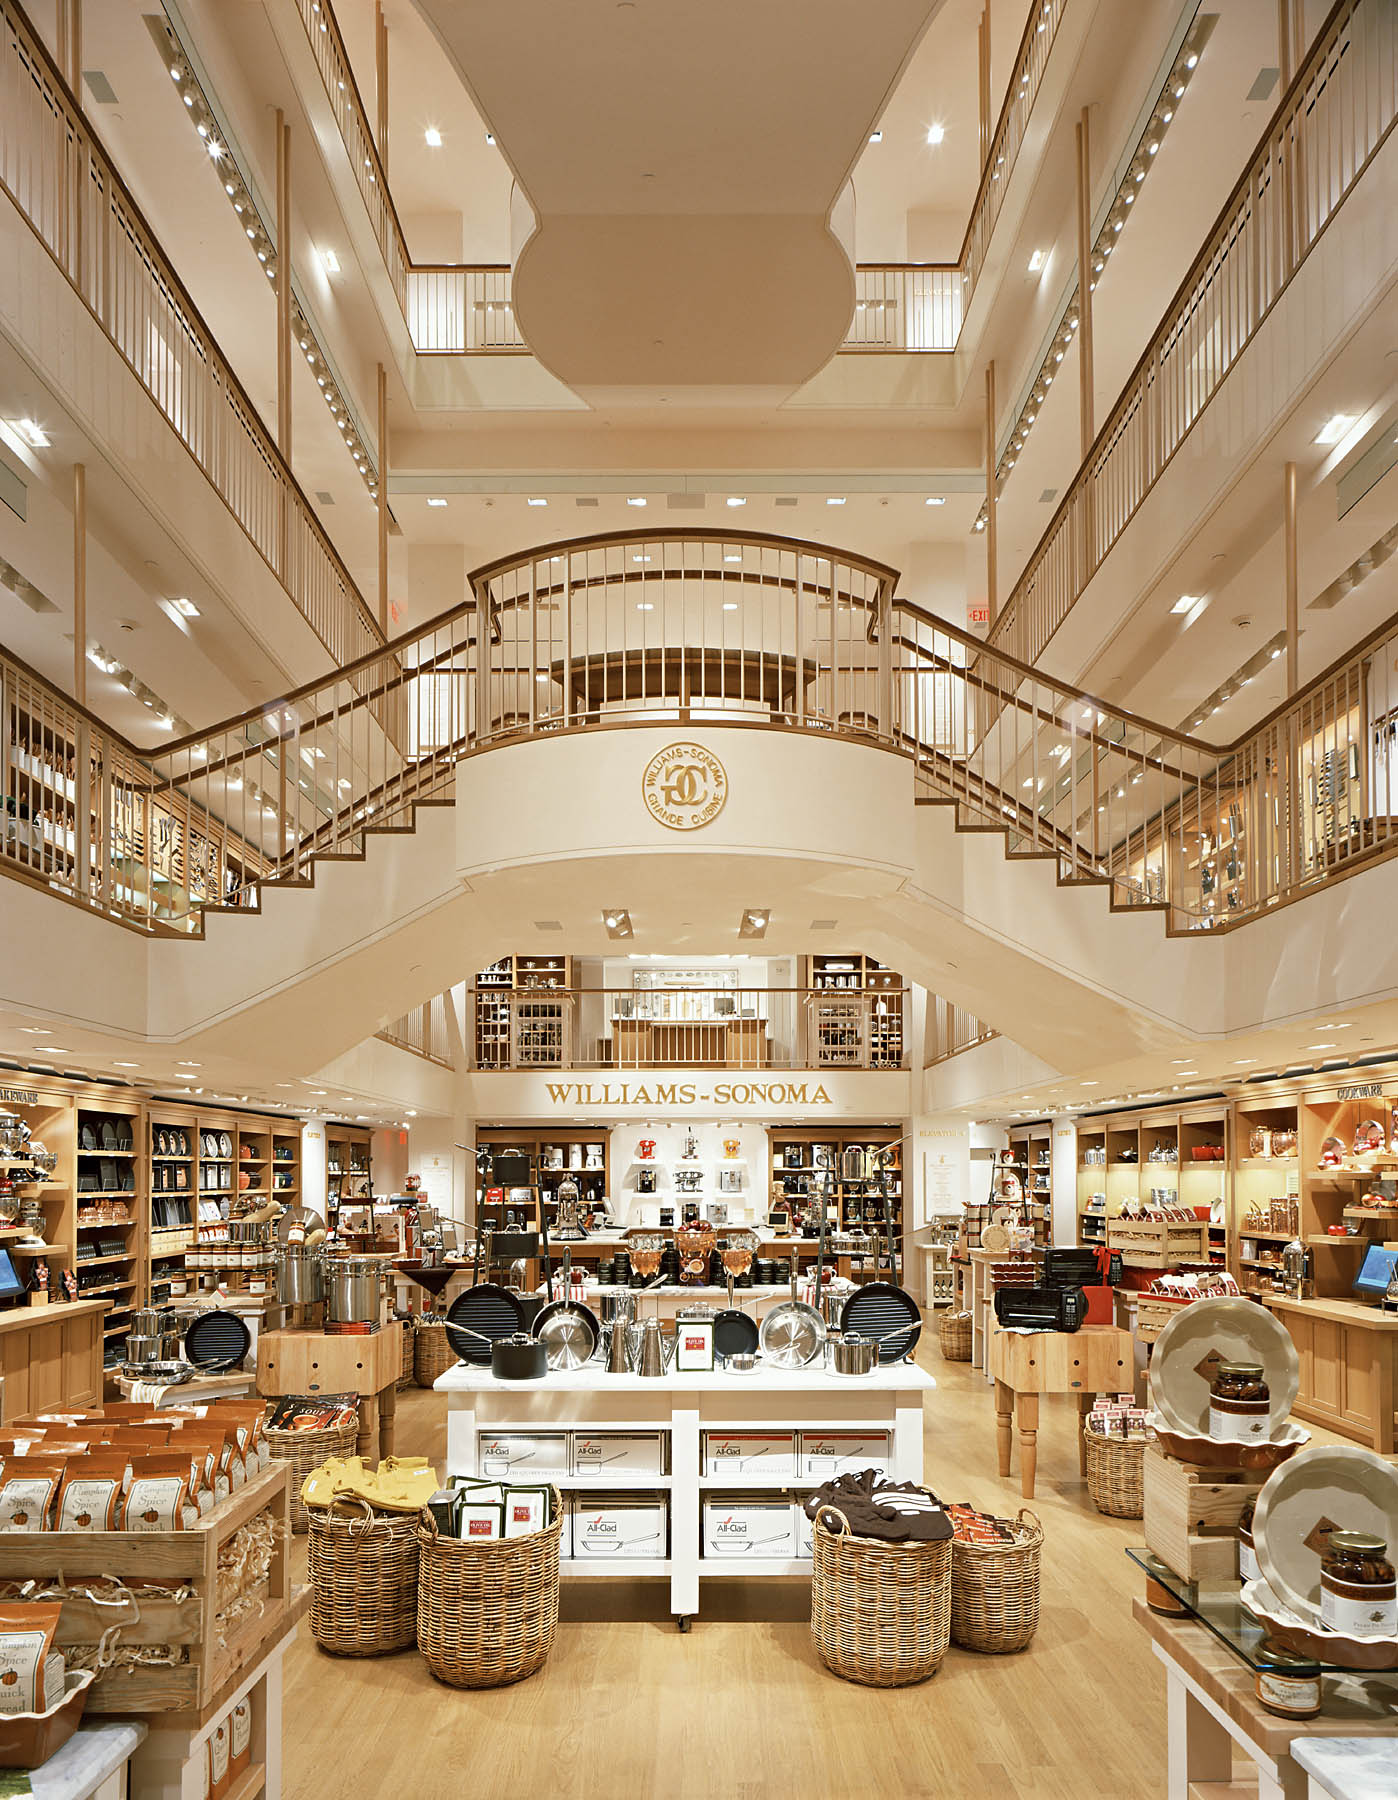 Williams-Sonoma Post Street, San Francisco, California. © Chun Y Lai. All Rights Reserved.